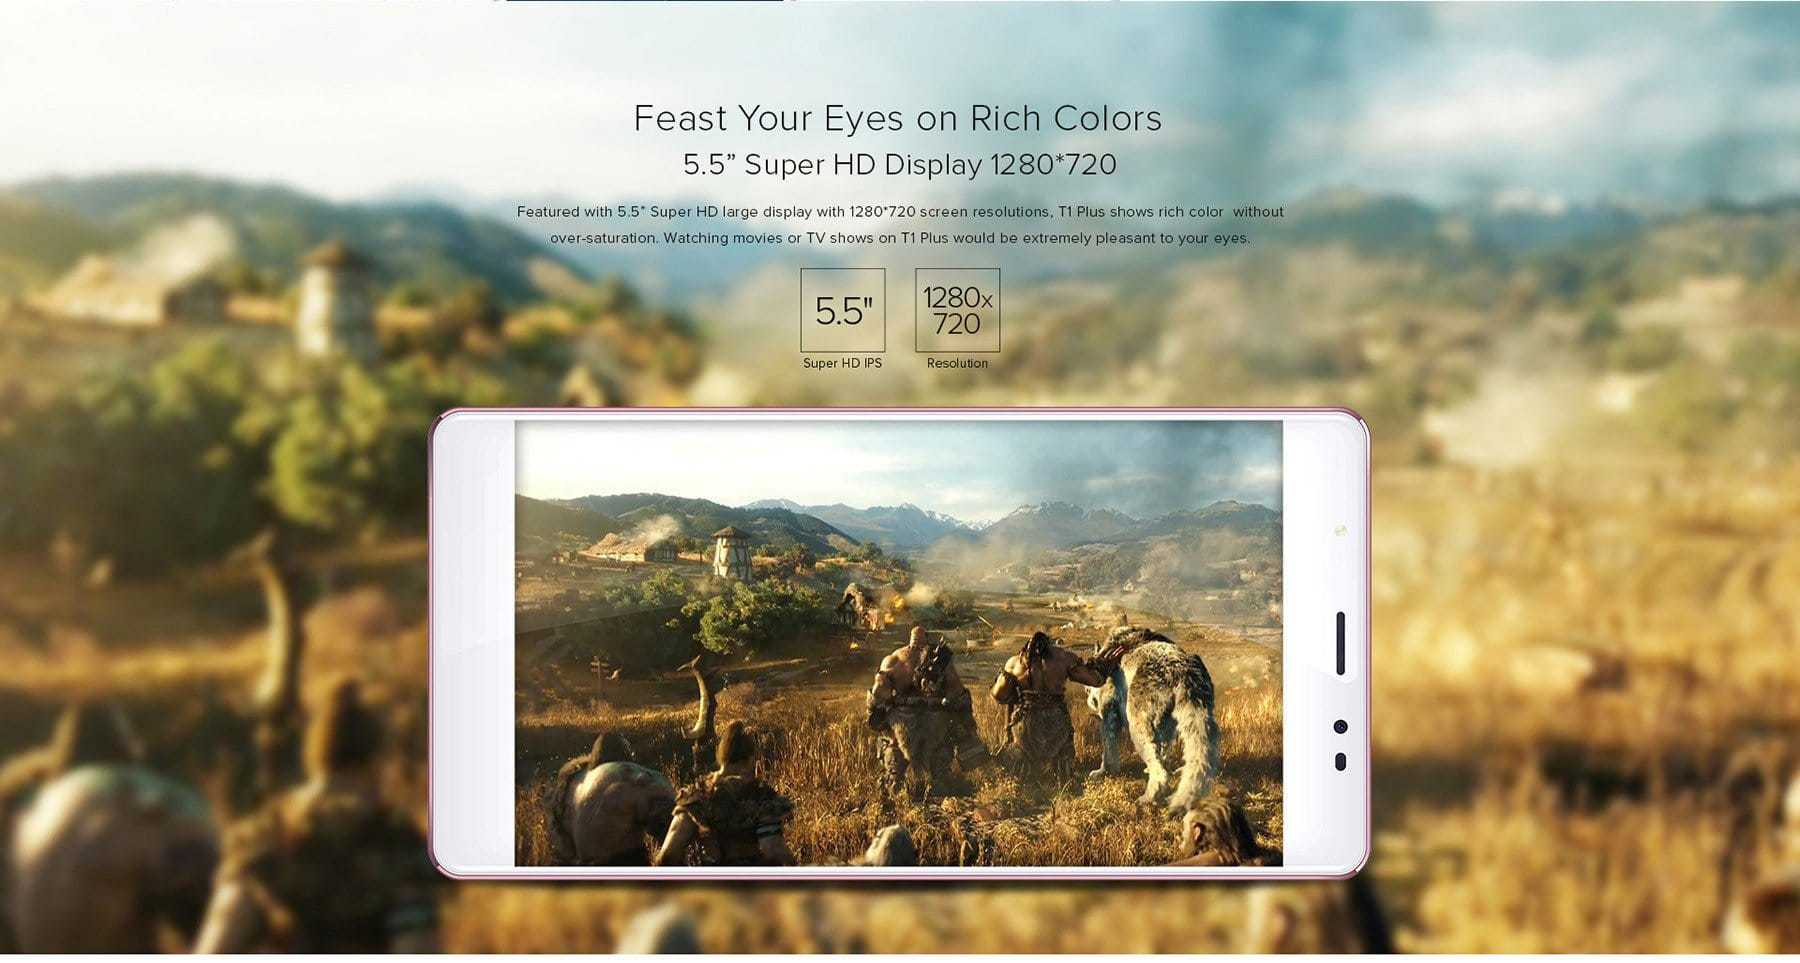 Leagoo-t1-plus-4g-phablet-launched